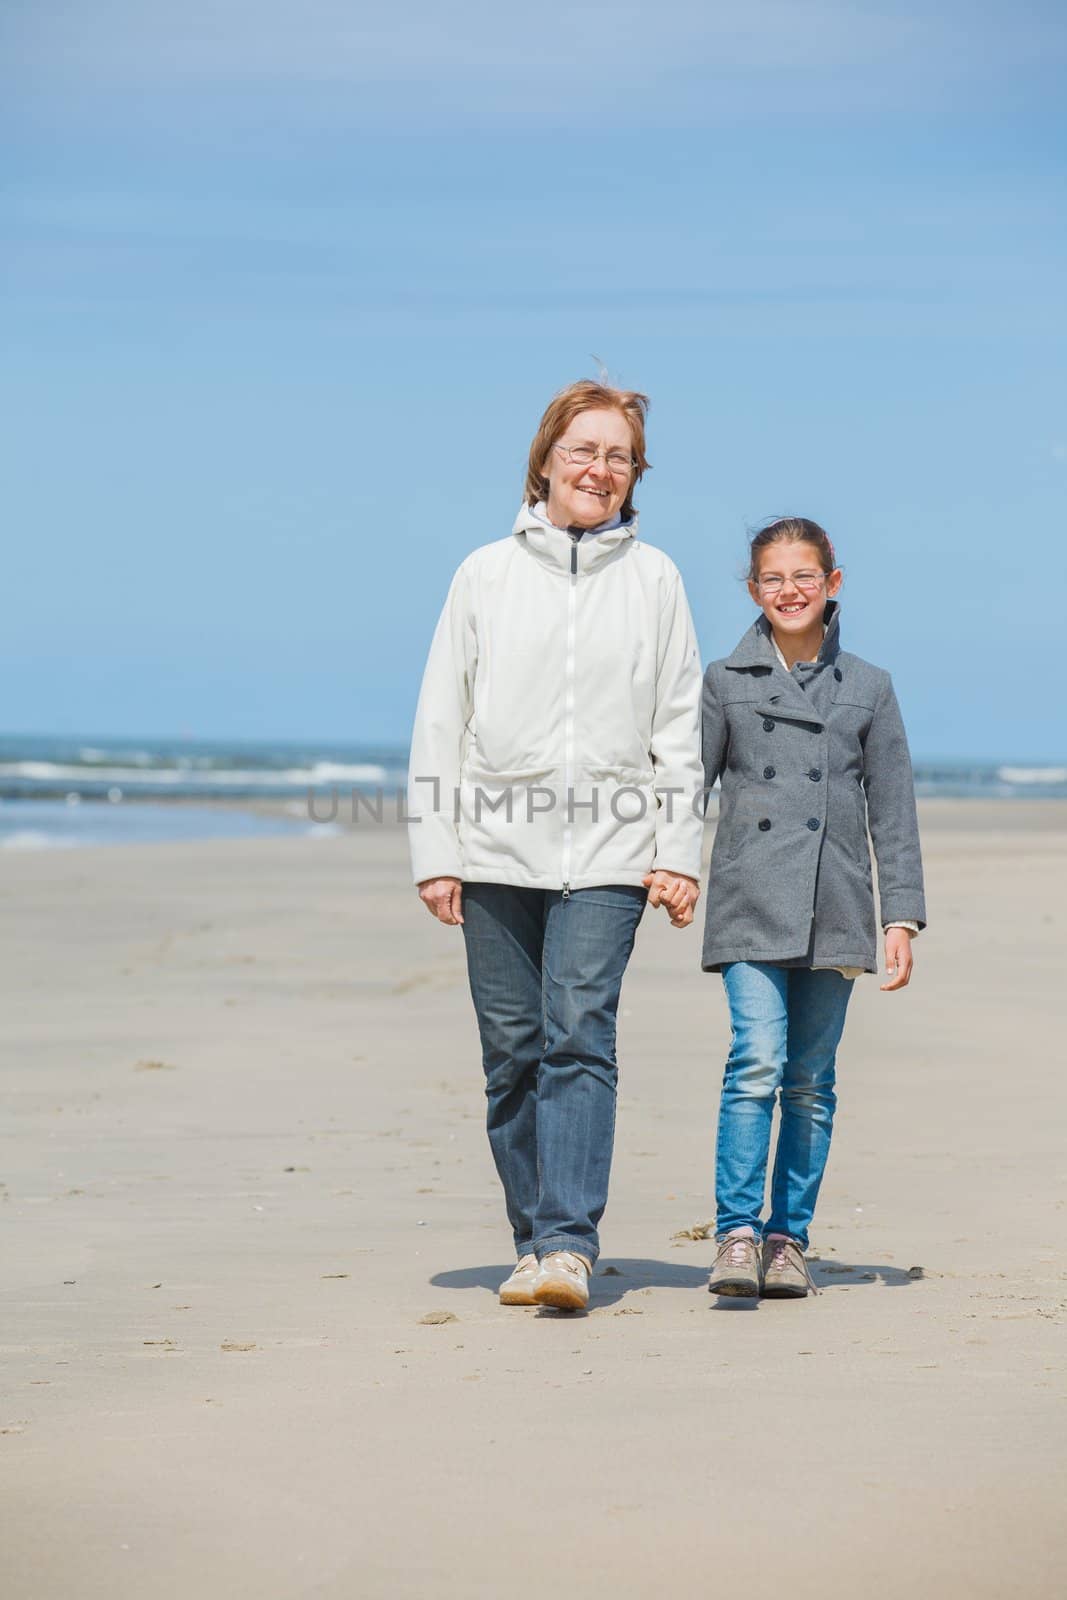 Beautiful girl and her grandmother walking on the beach. Holland